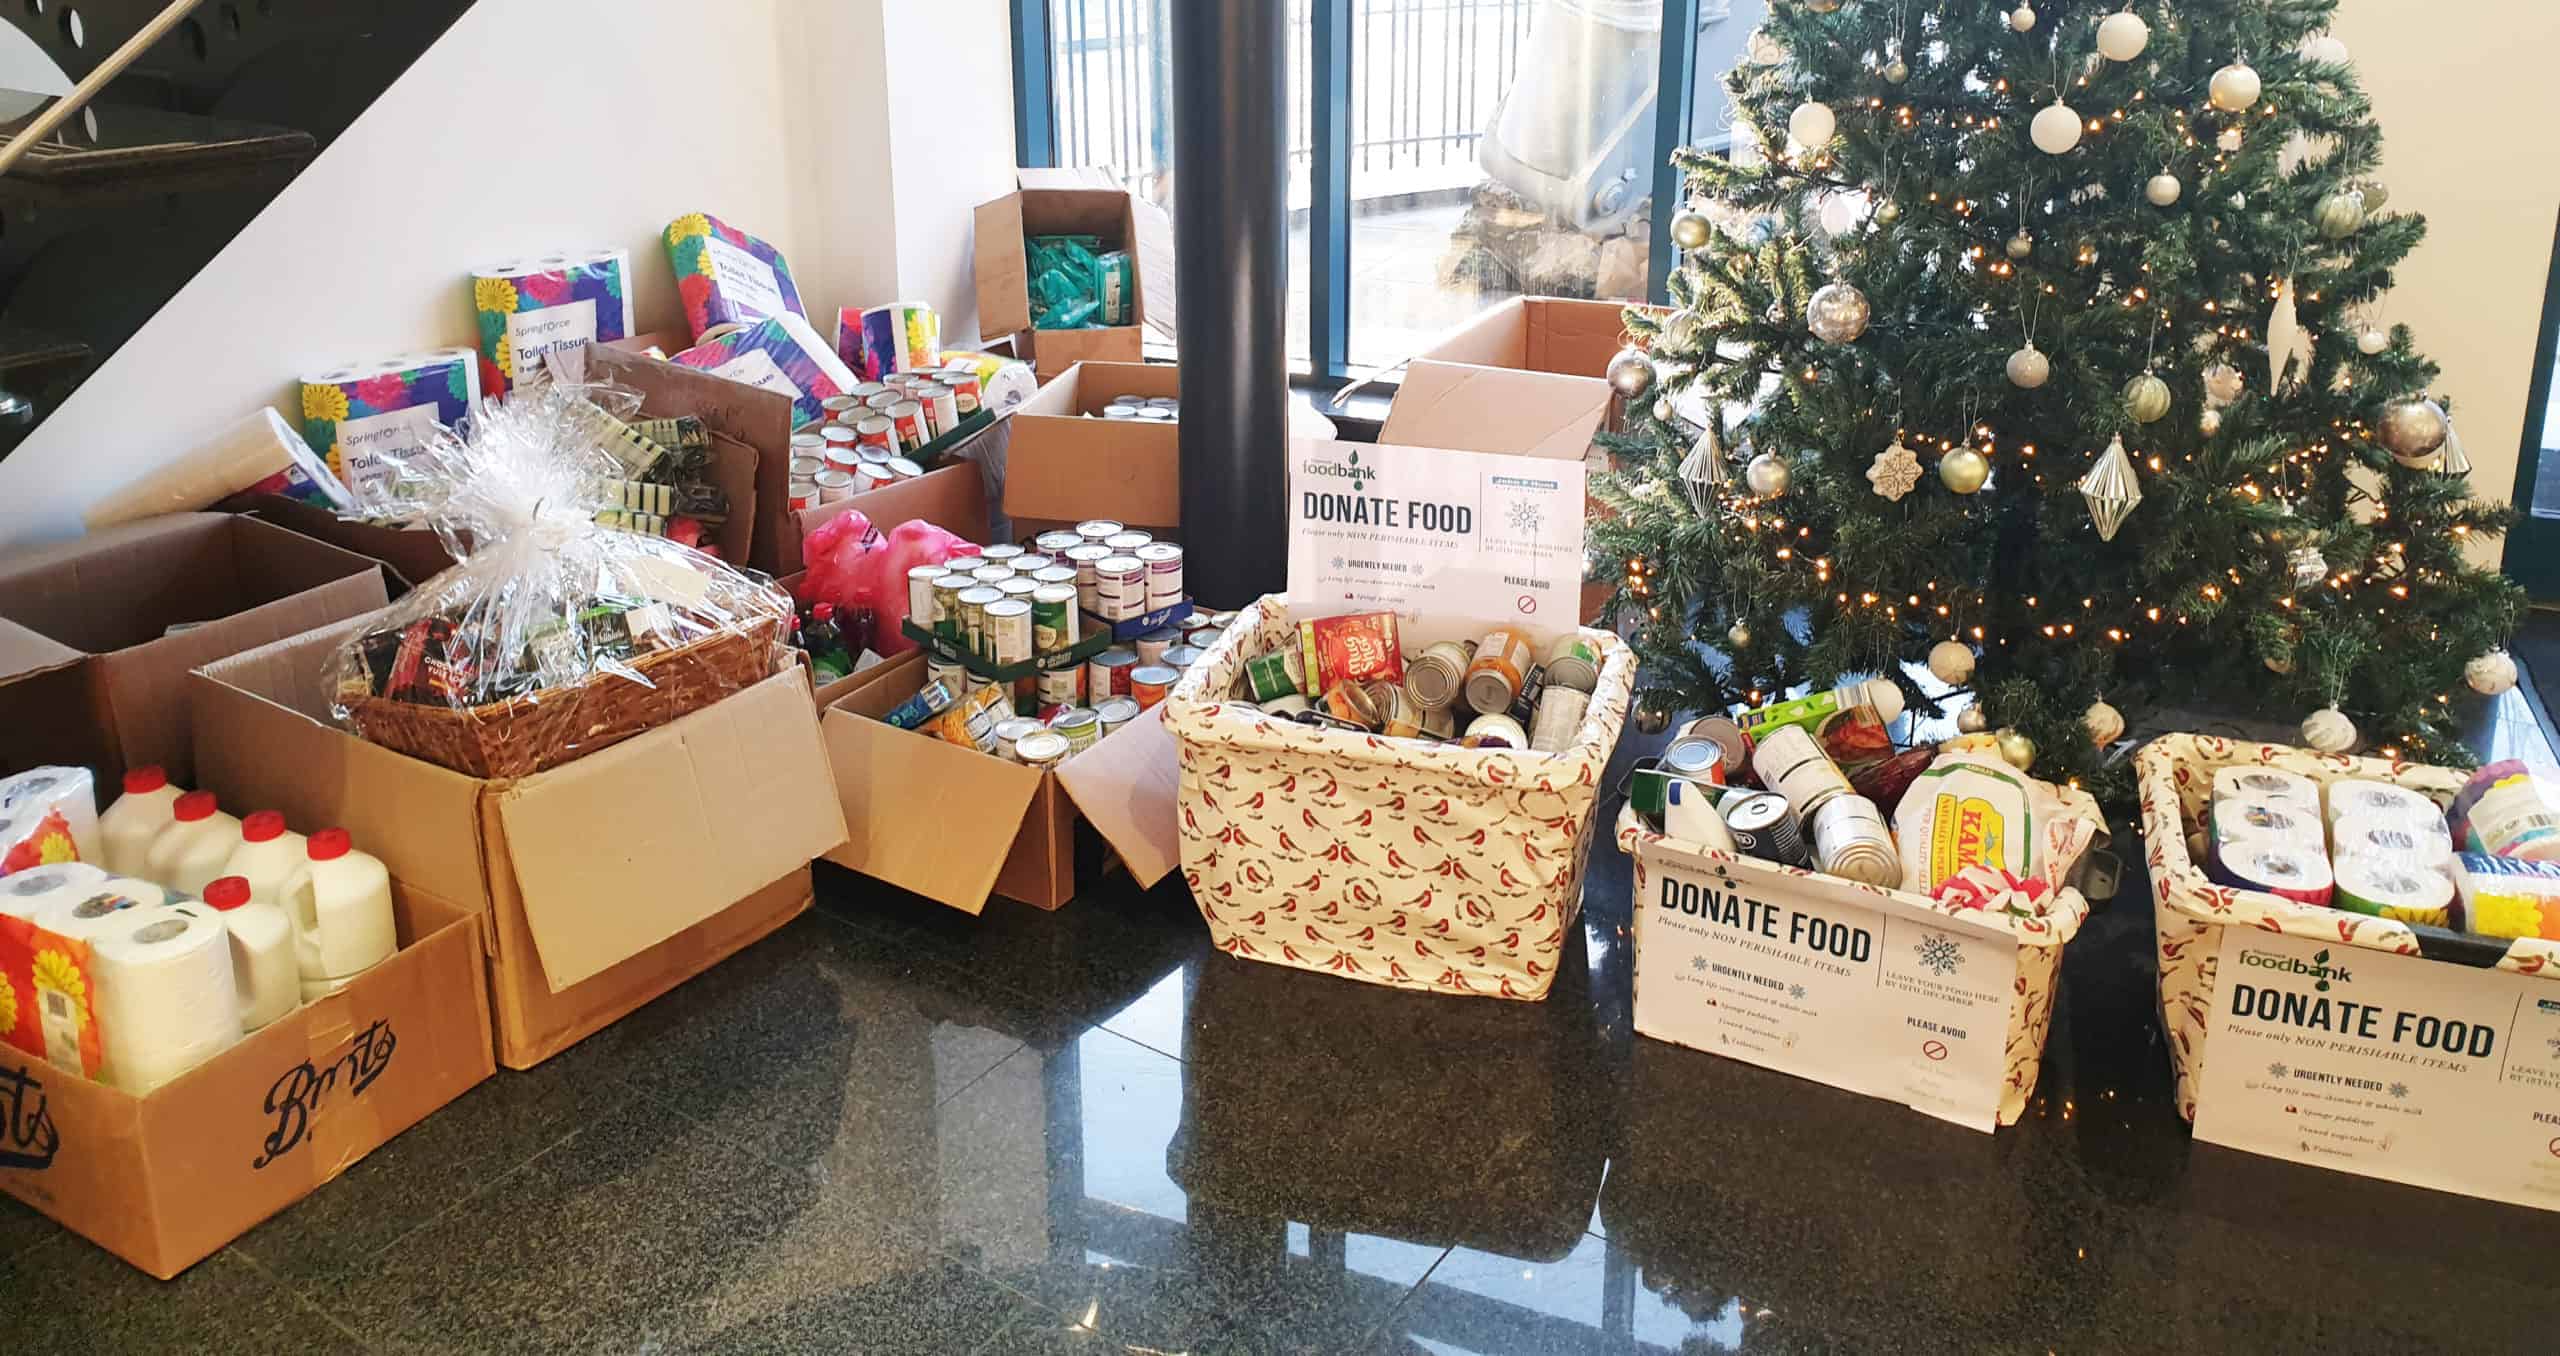 John F Hunt donates over 800 items to local food bank